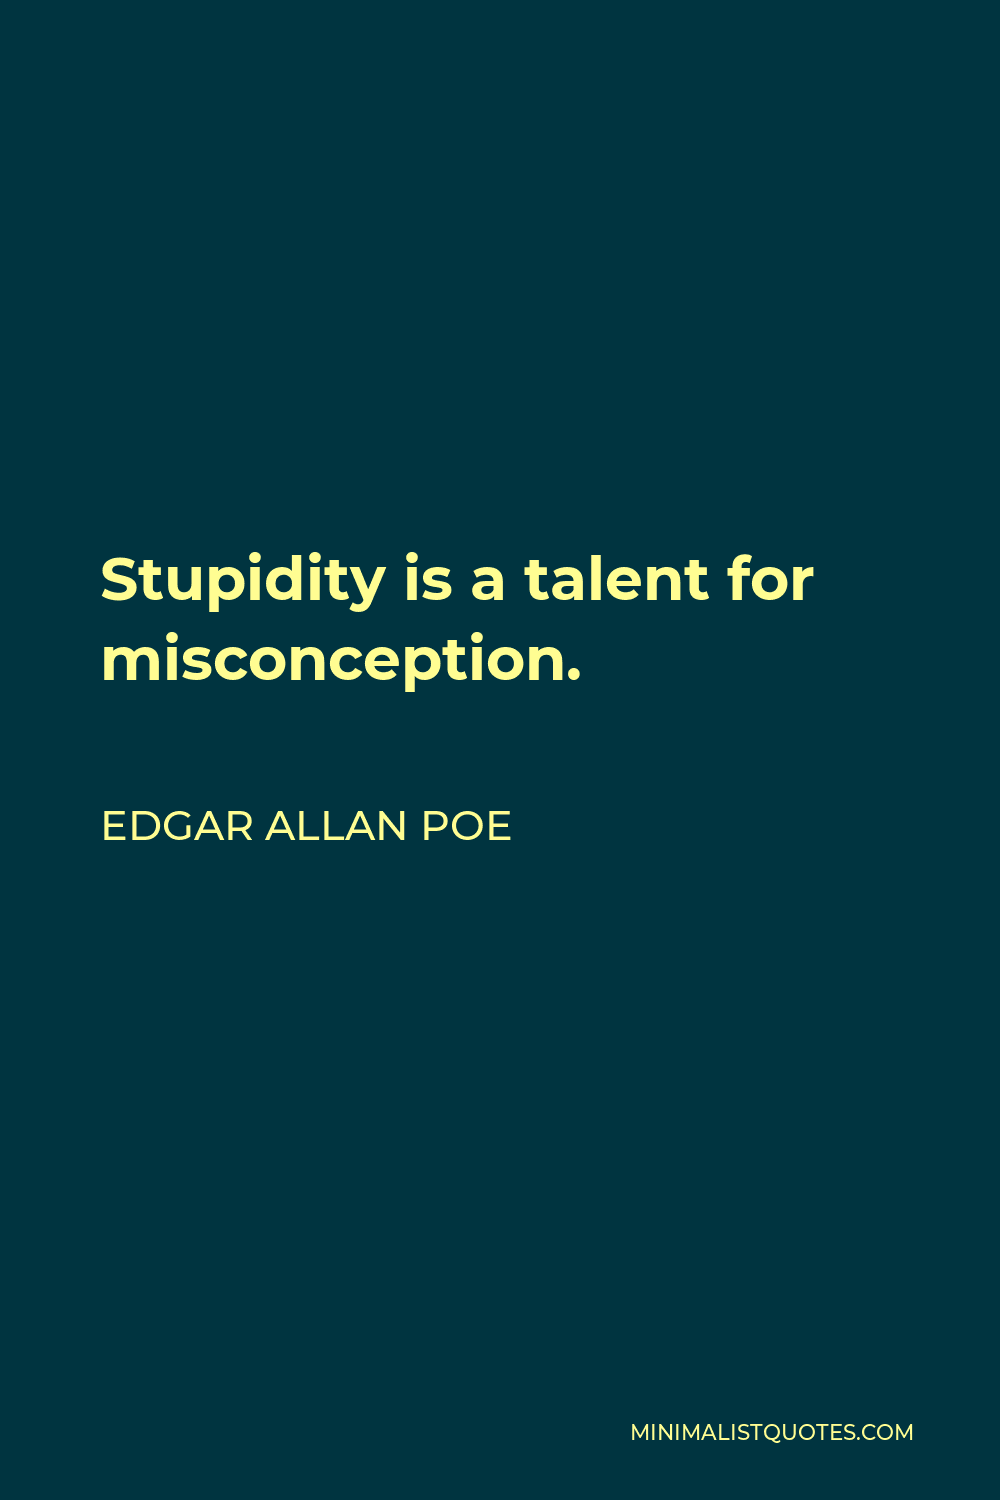 Edgar Allan Poe Quote - Stupidity is a talent for misconception.